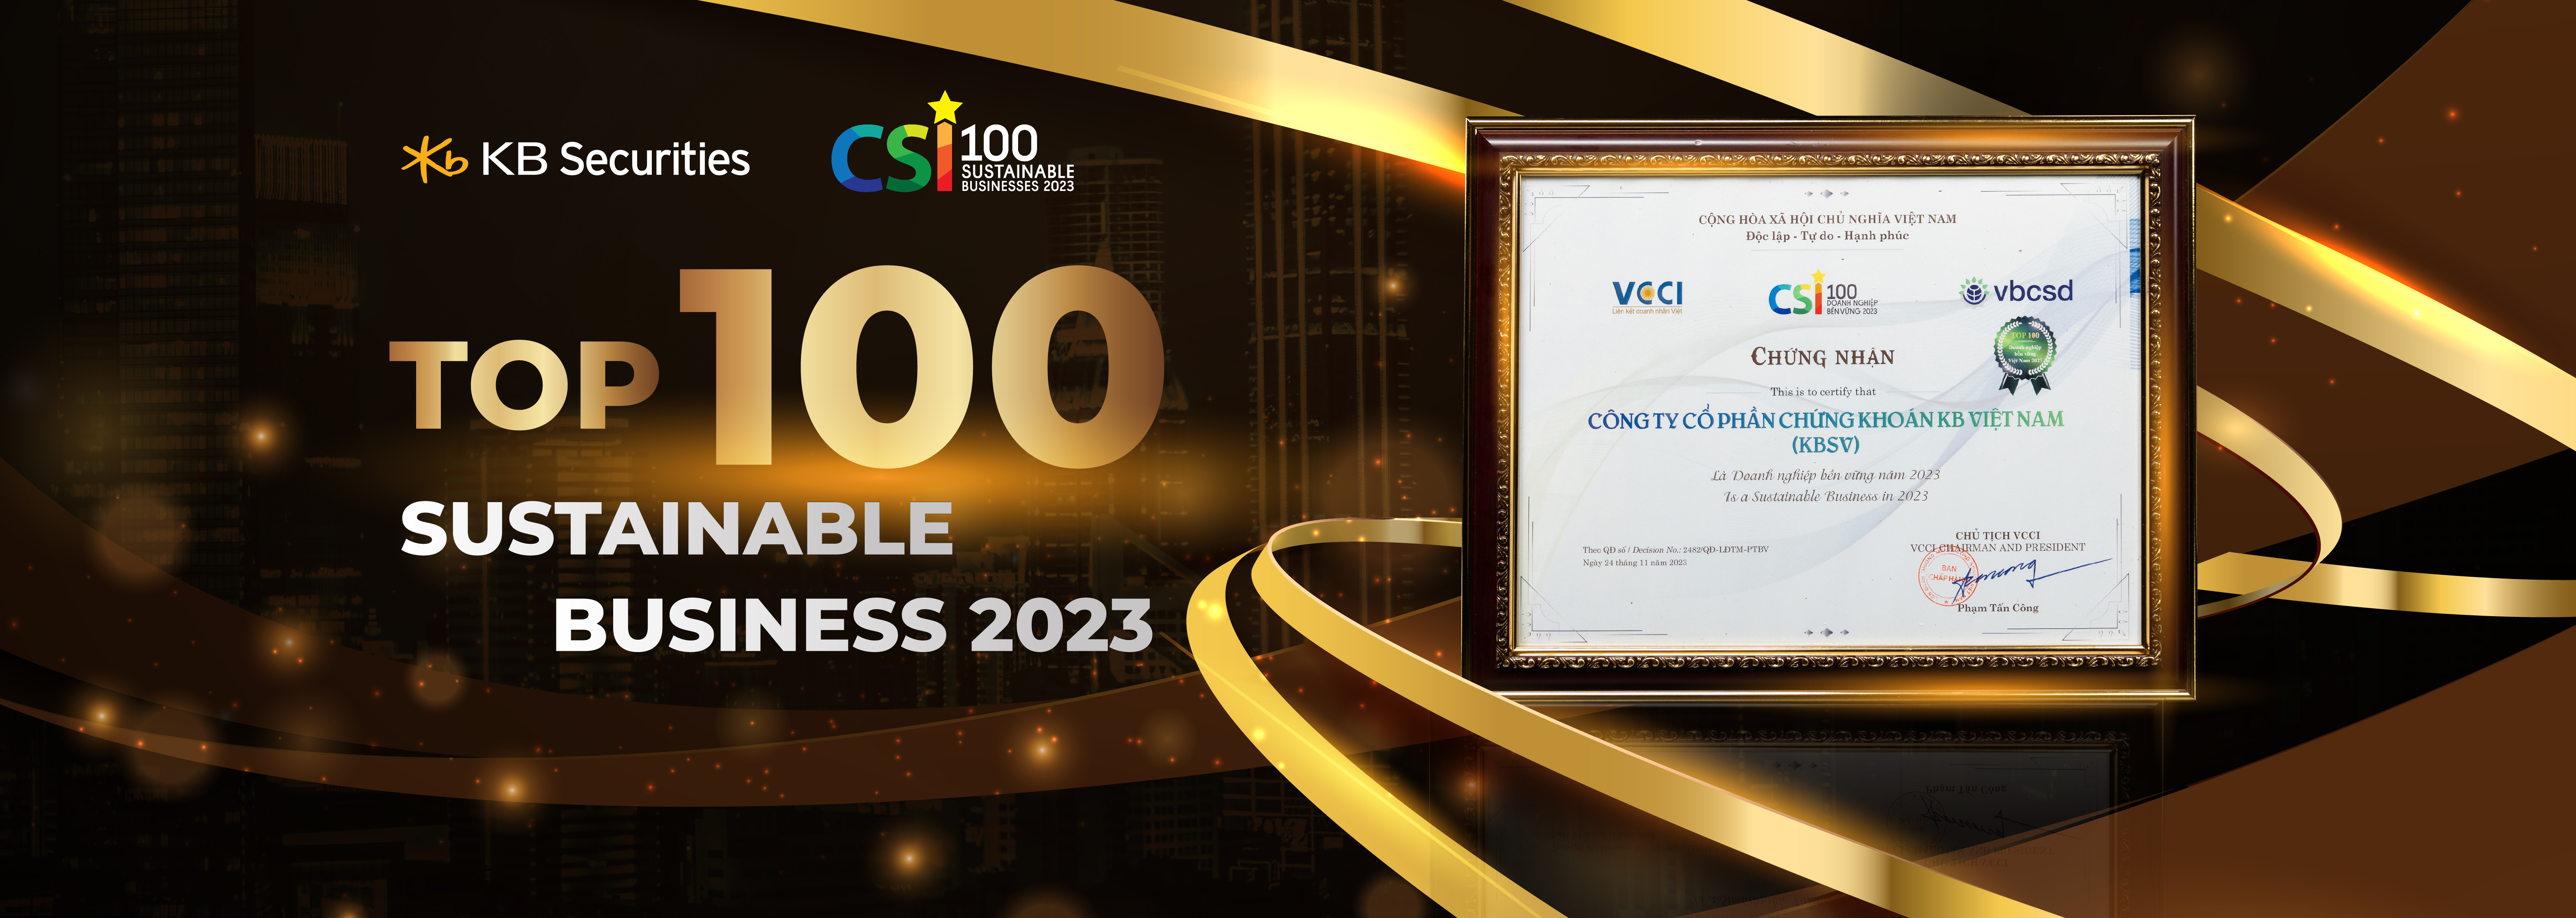 Top 100 sustainable business